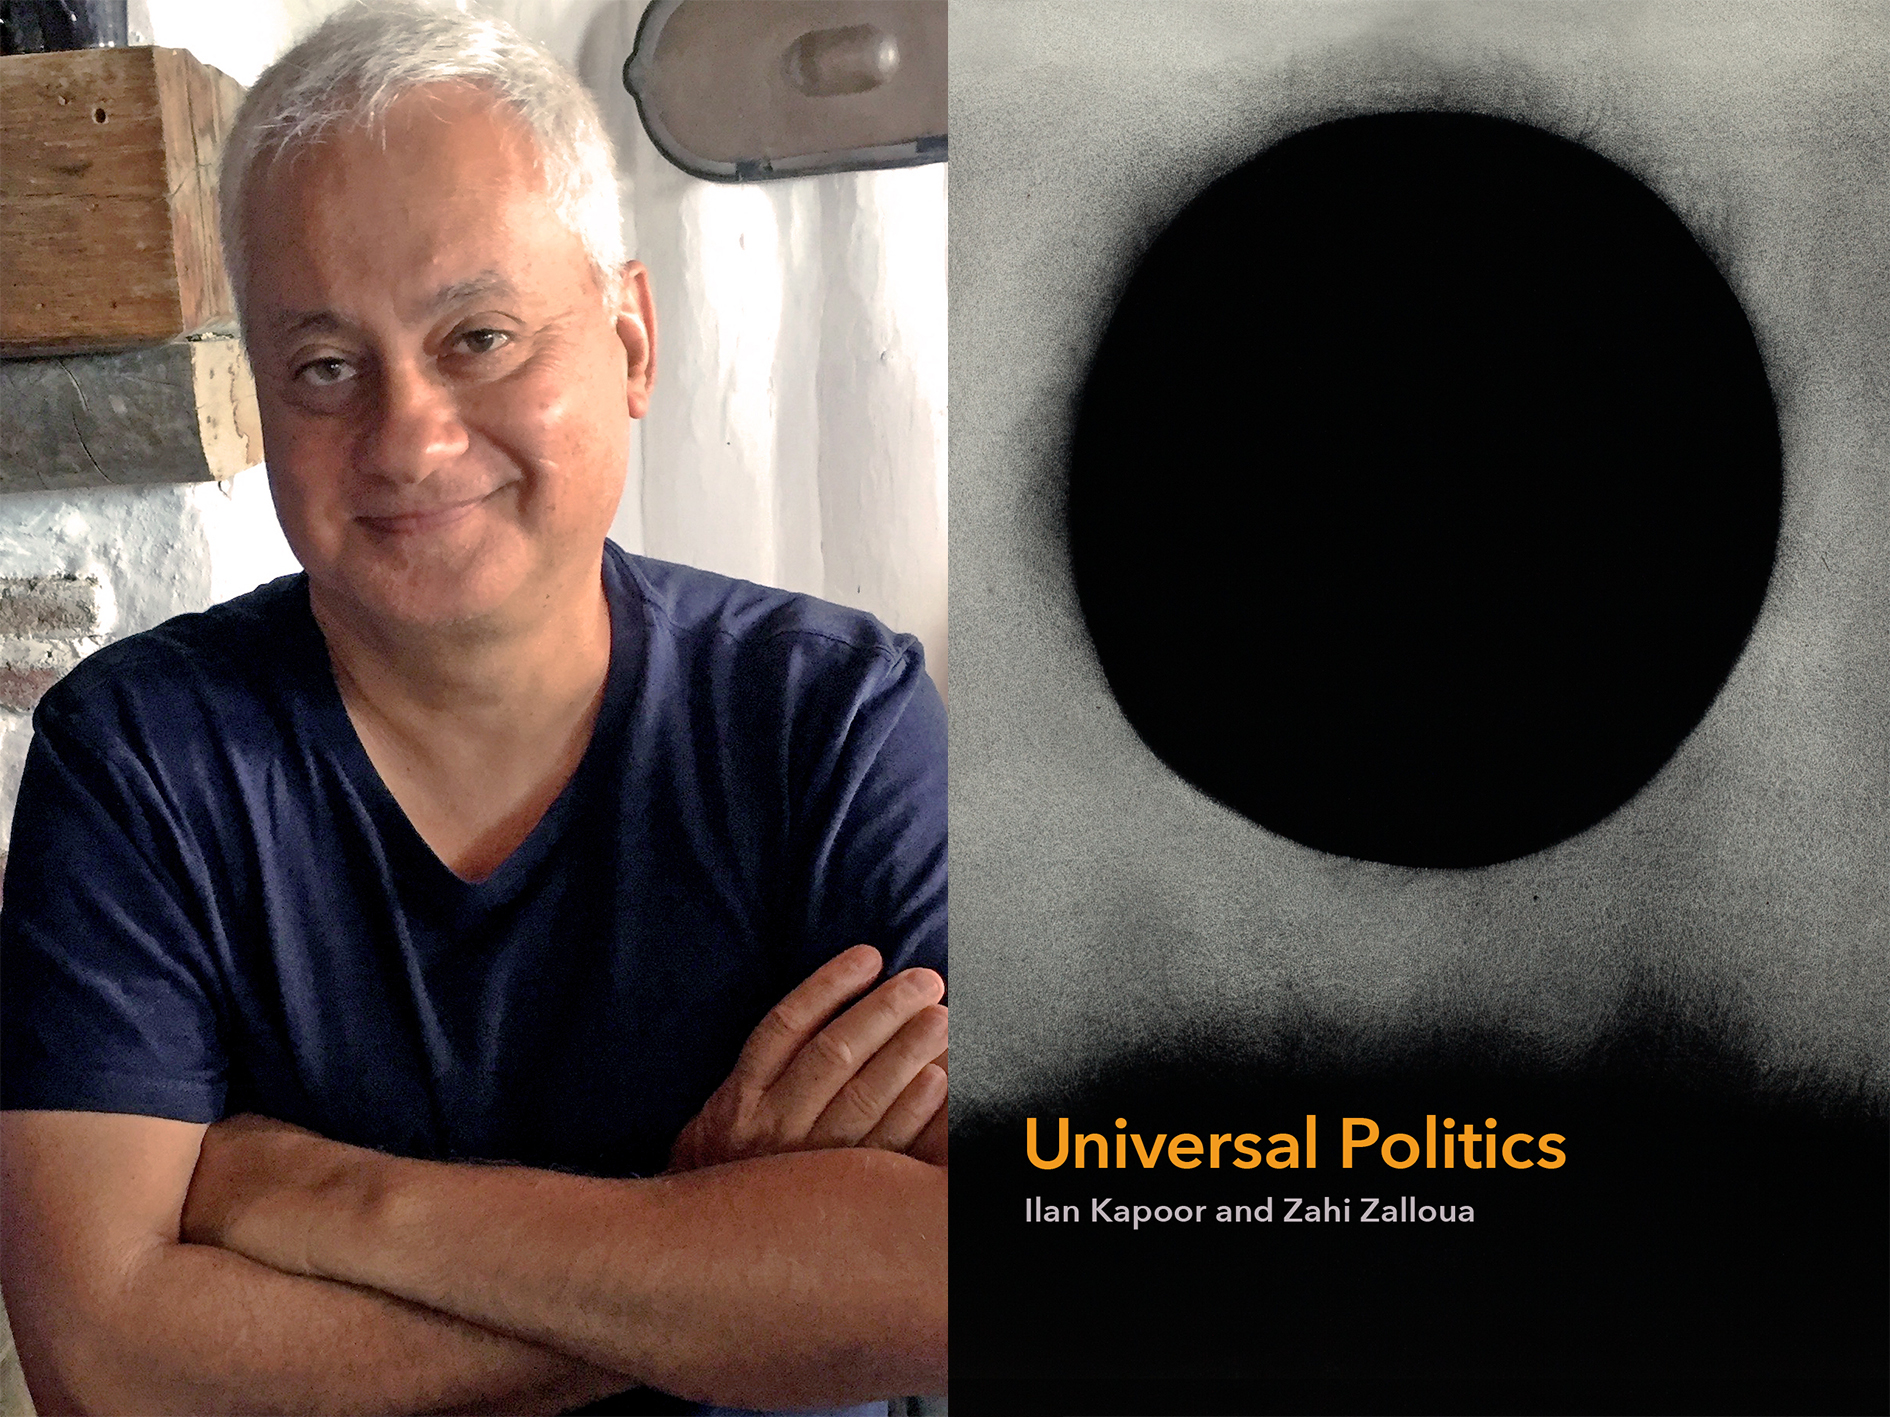 York University Professor Ilan Kapoor (left) and the cover of his new book, "Universal Politics" by Ilan Kapoor and Zahi Zalloua (right) 